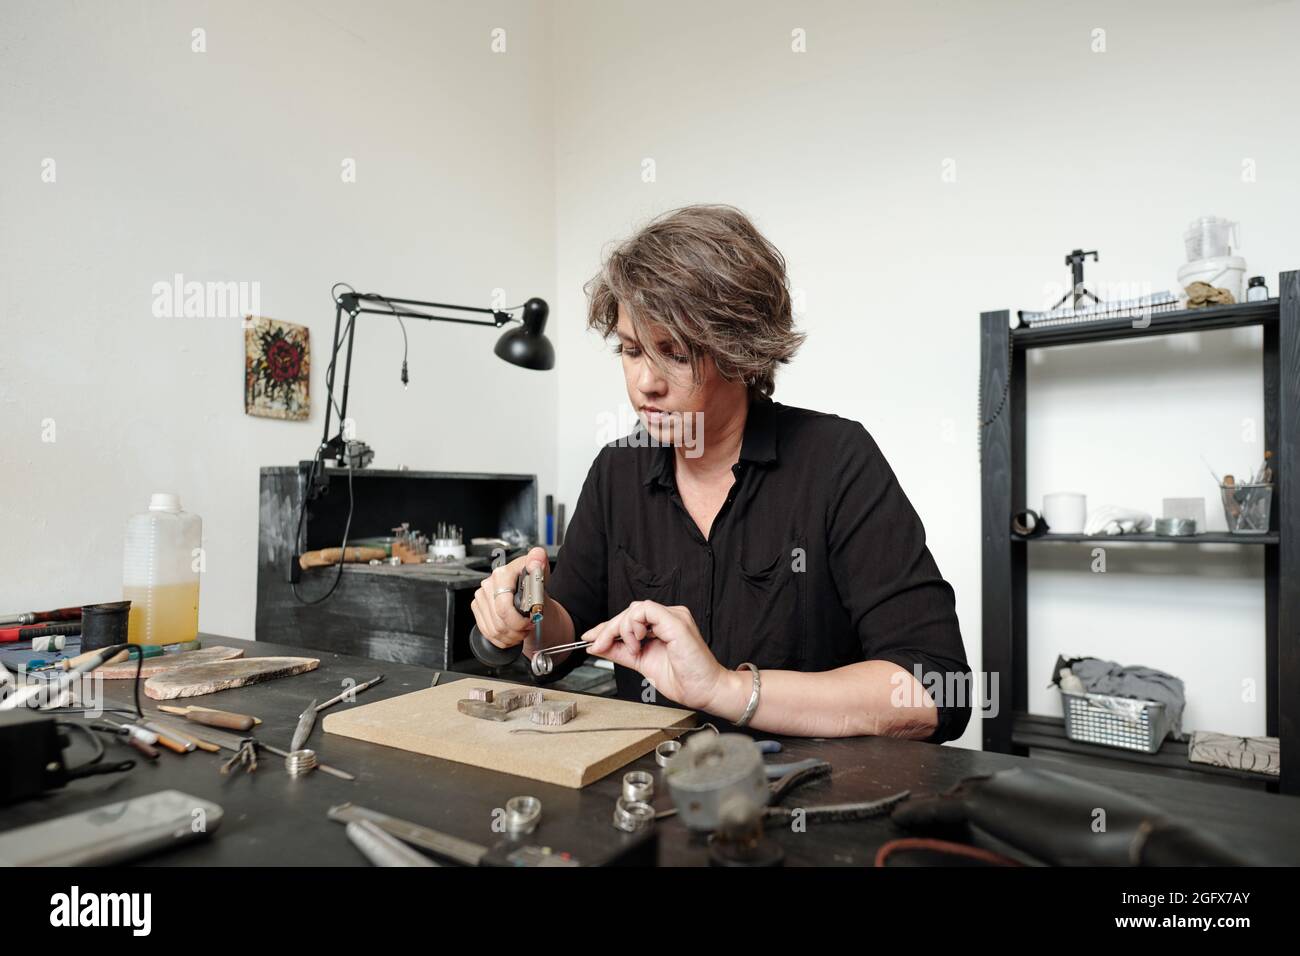 Busy middle-aged woman in black shirt sitting at desk in workshop and soldering Jewelry while finishing work Stock Photo